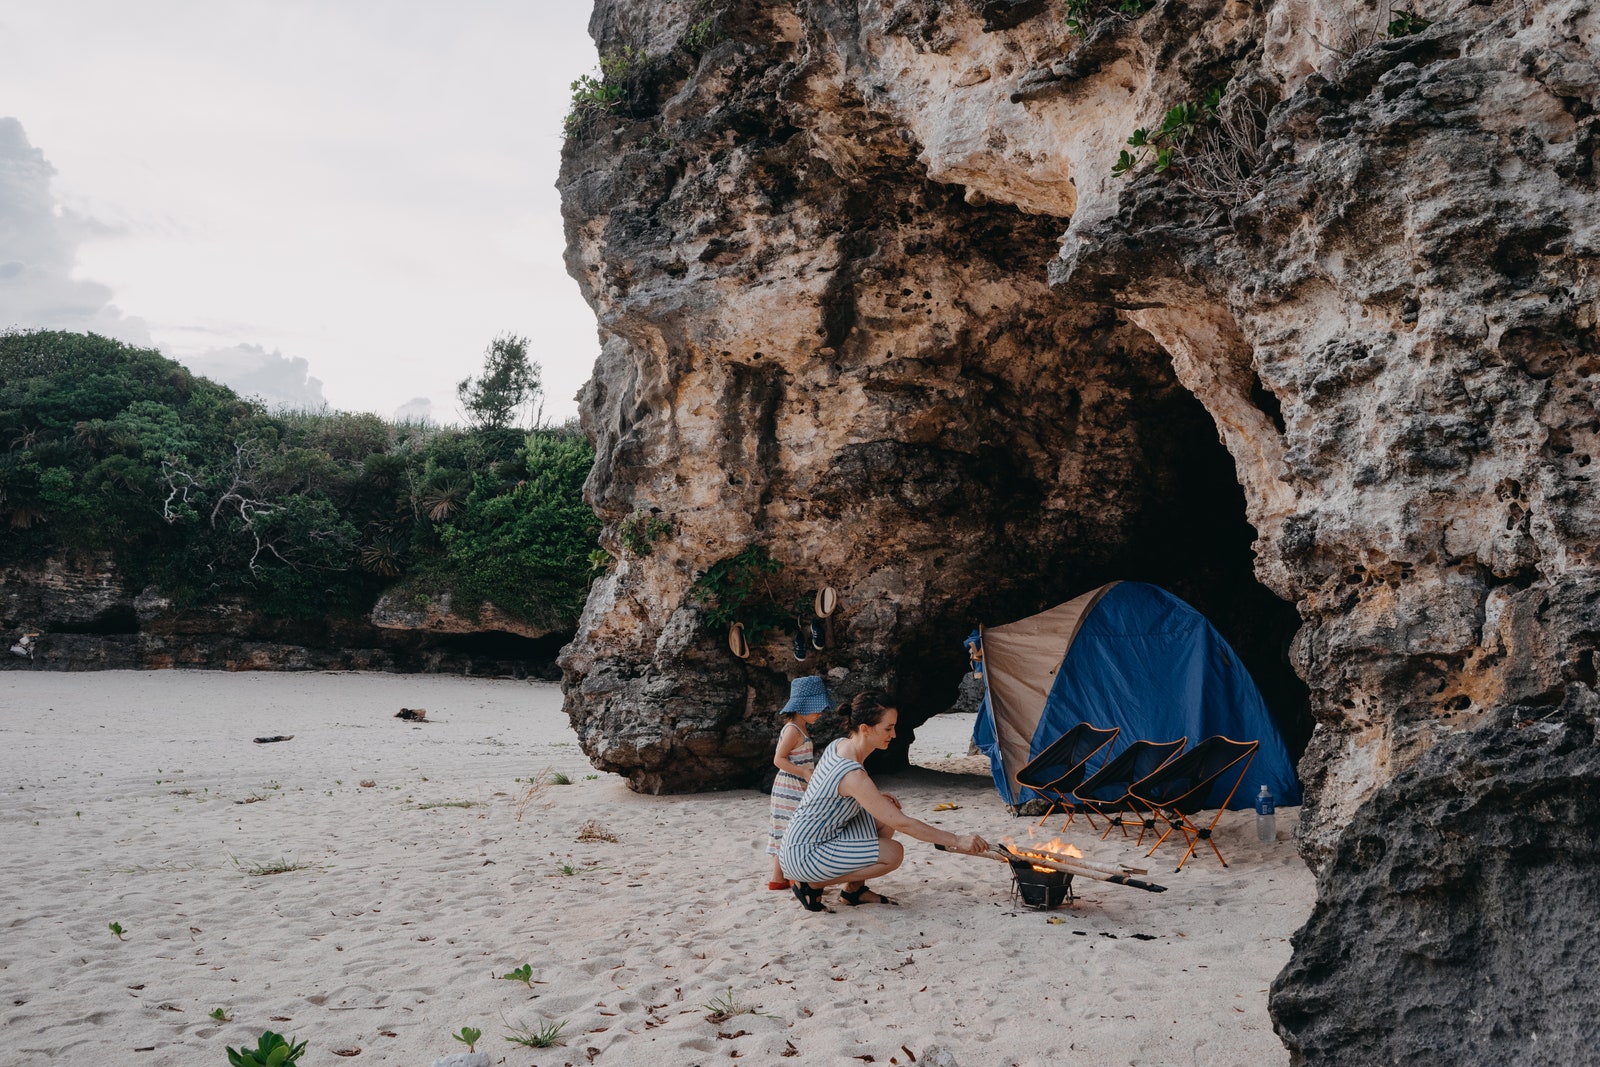 Mother and child enjoying camping in cave on beach with campfire and tent Okinoerabu Island of the Amami Islands...